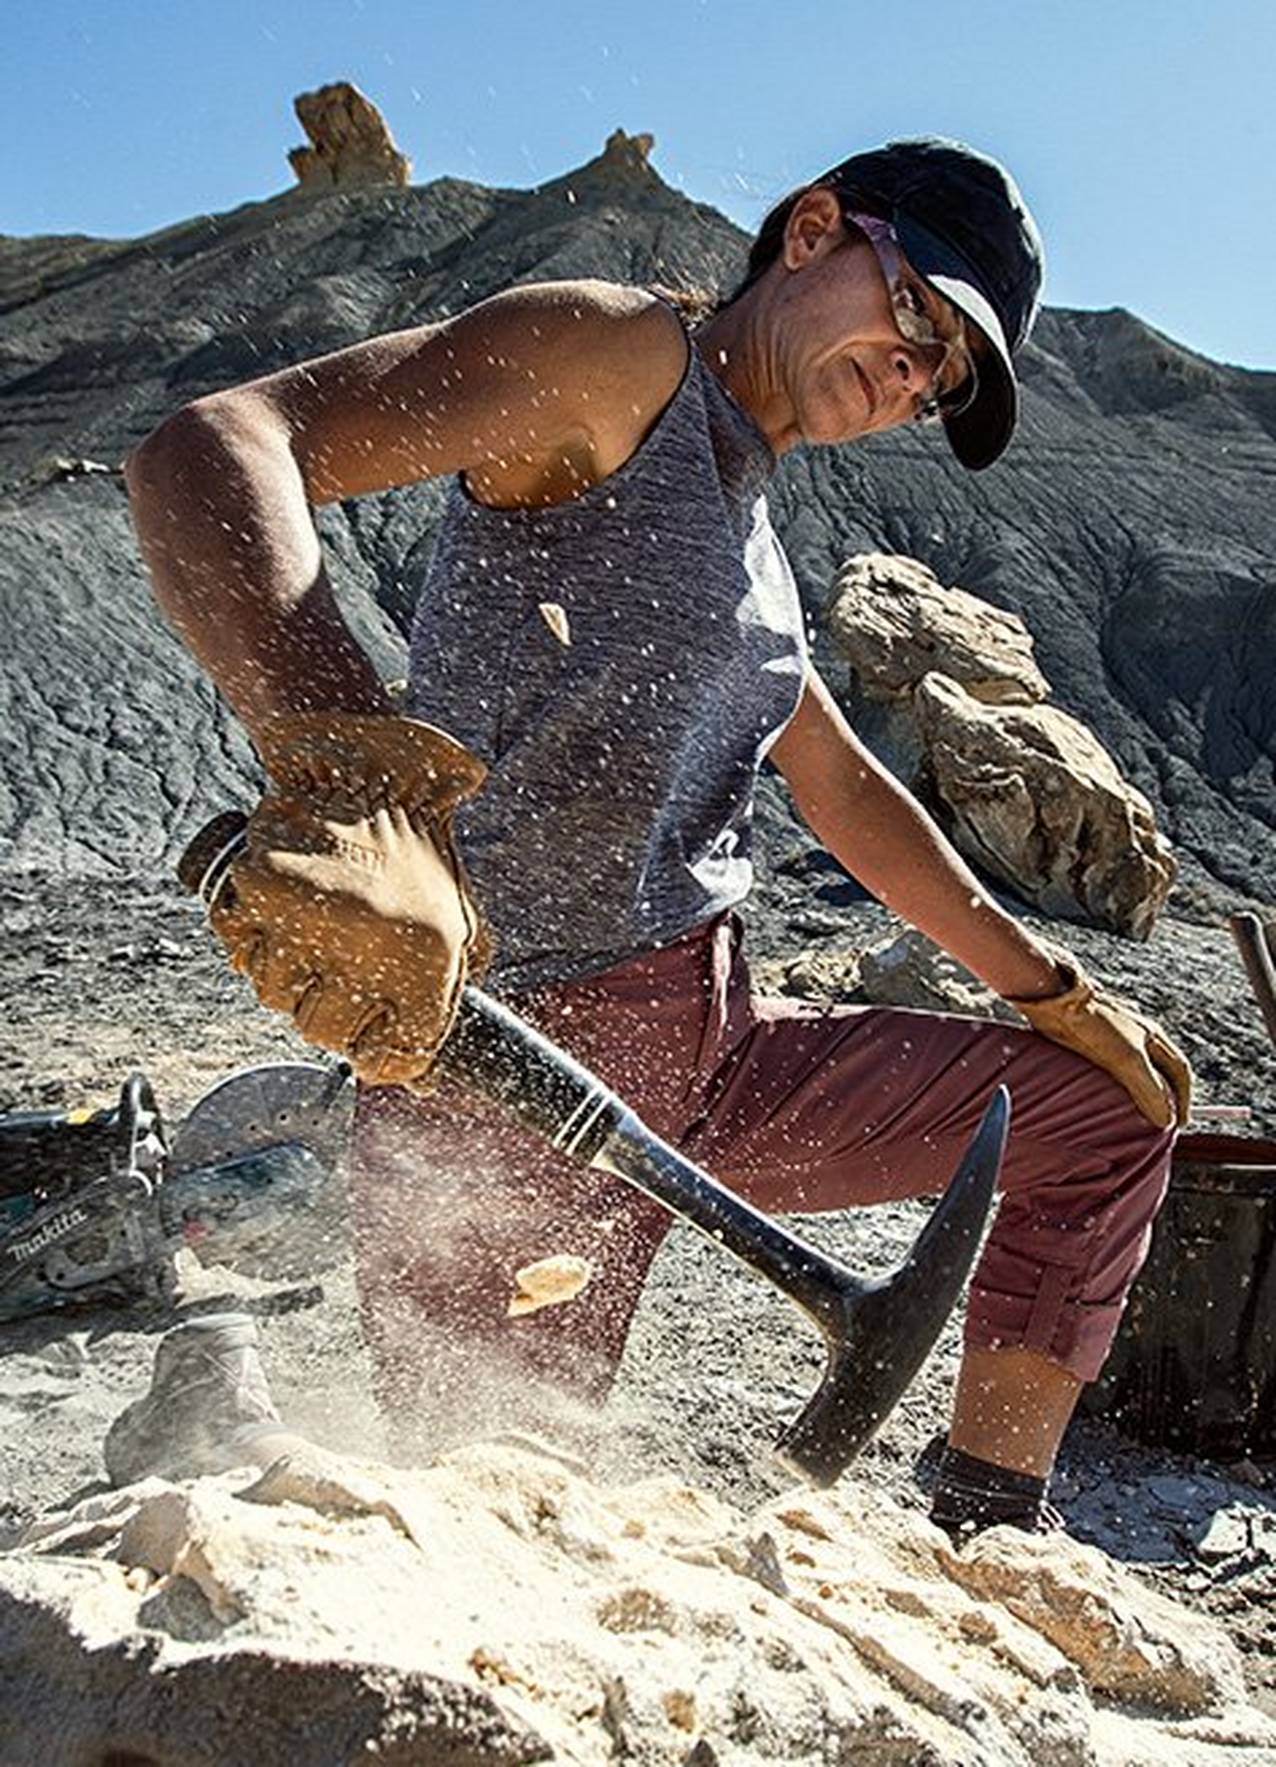 A woman uses a rock hammer in the hills of Utah. She is wearing pink dry on the fly capri pants and a gray tank top with protective gloves and glasses.